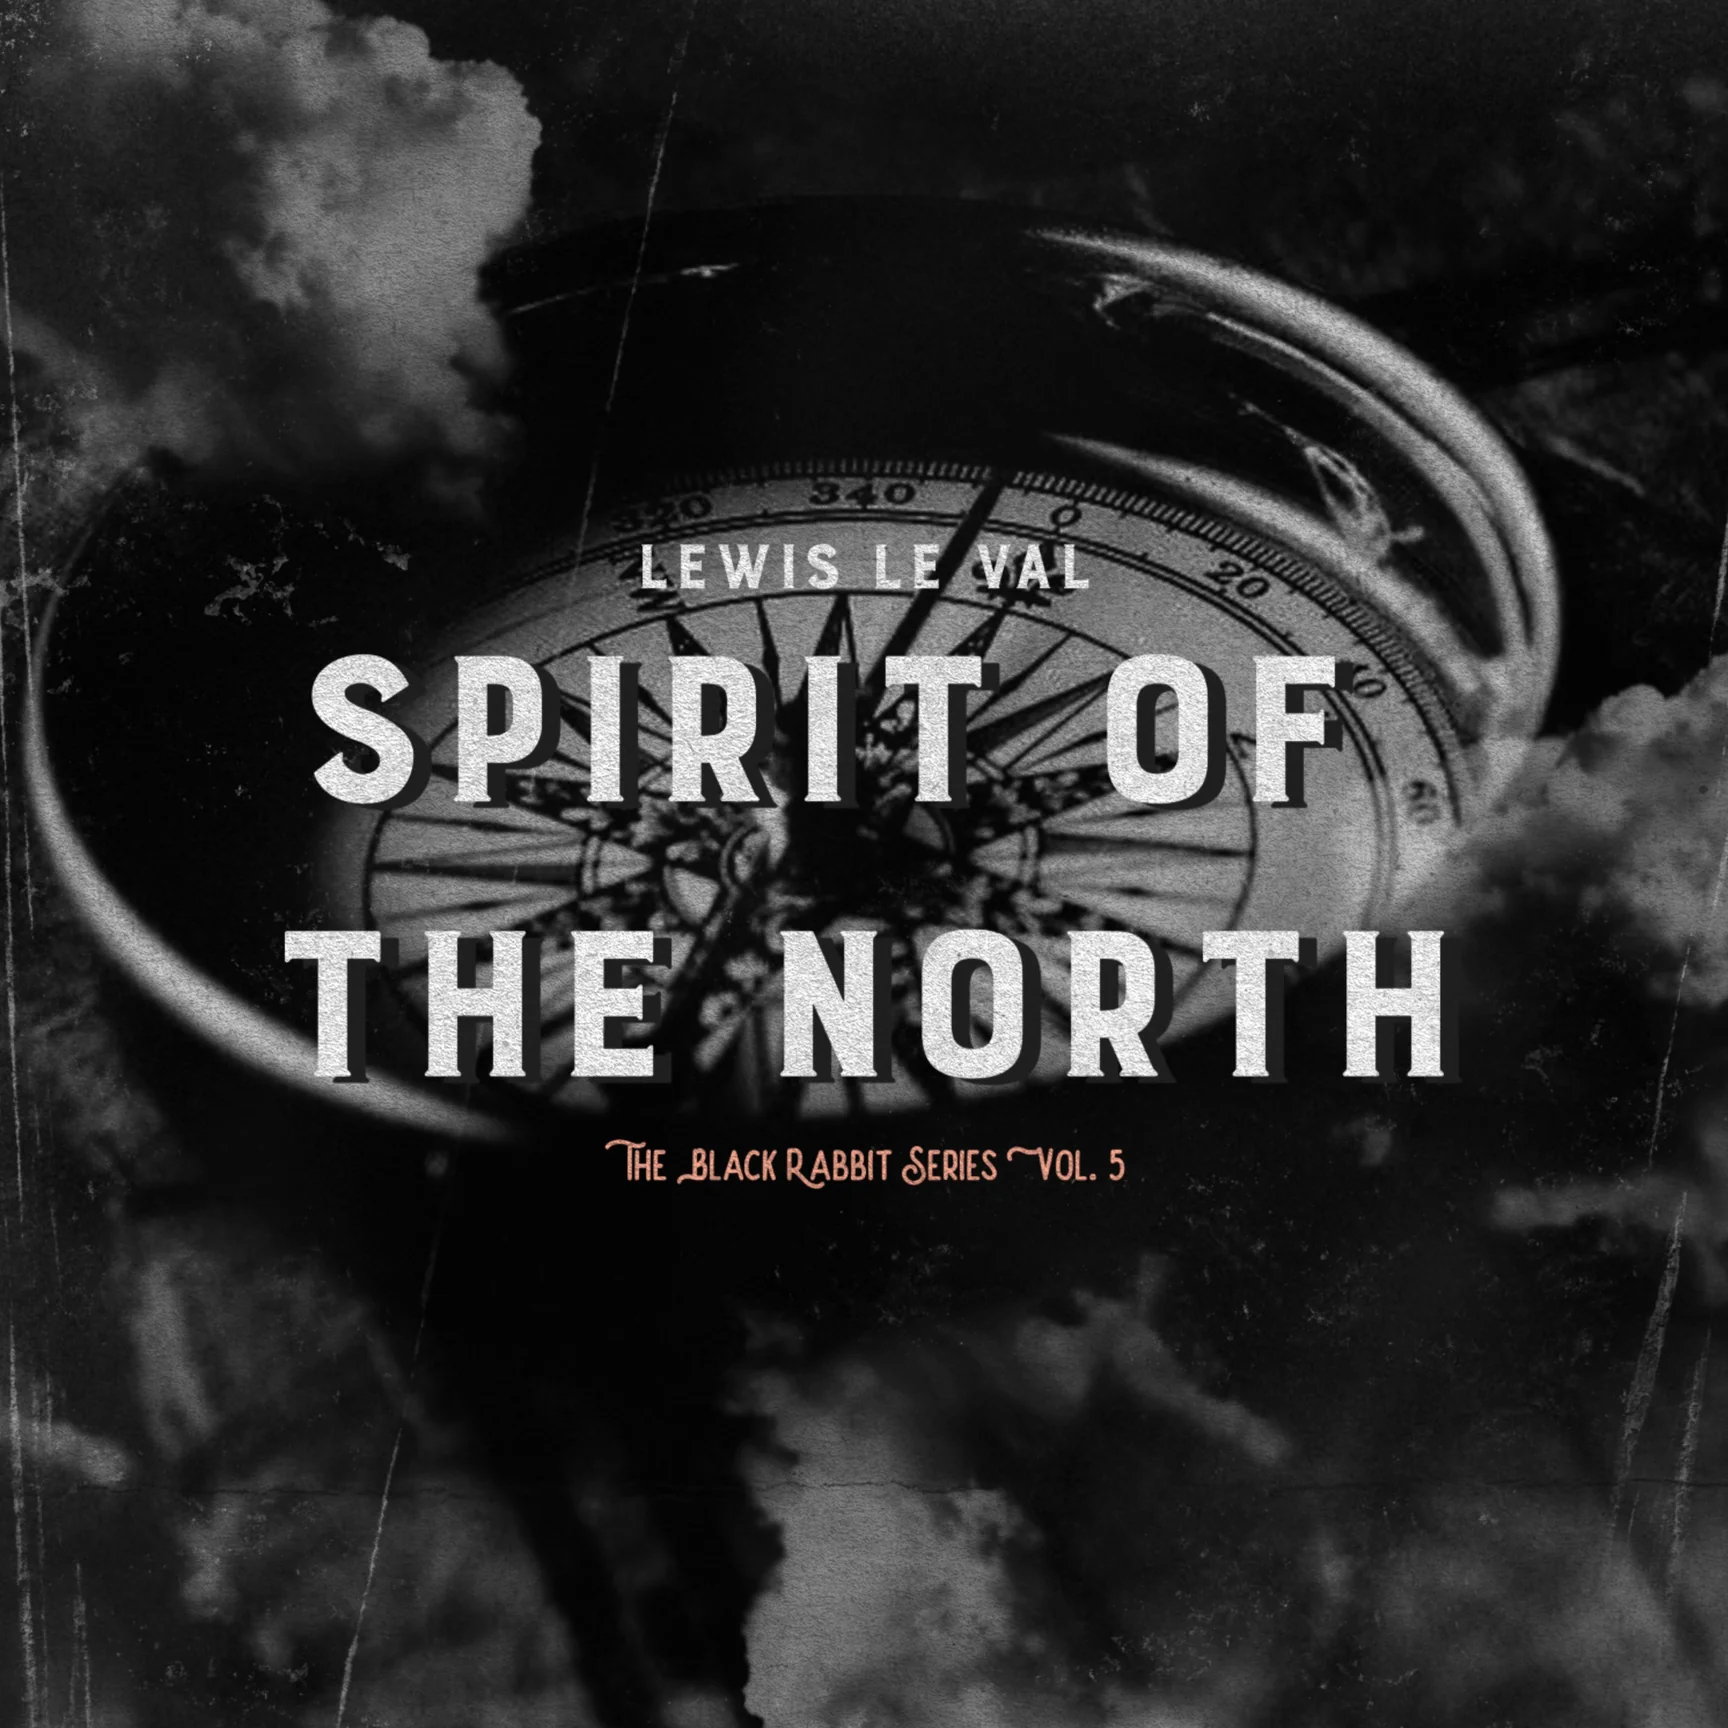 Black Rabbit Vol 5 Spirit of The North by Lewis Le Val (Mp4 Video Magic Download)